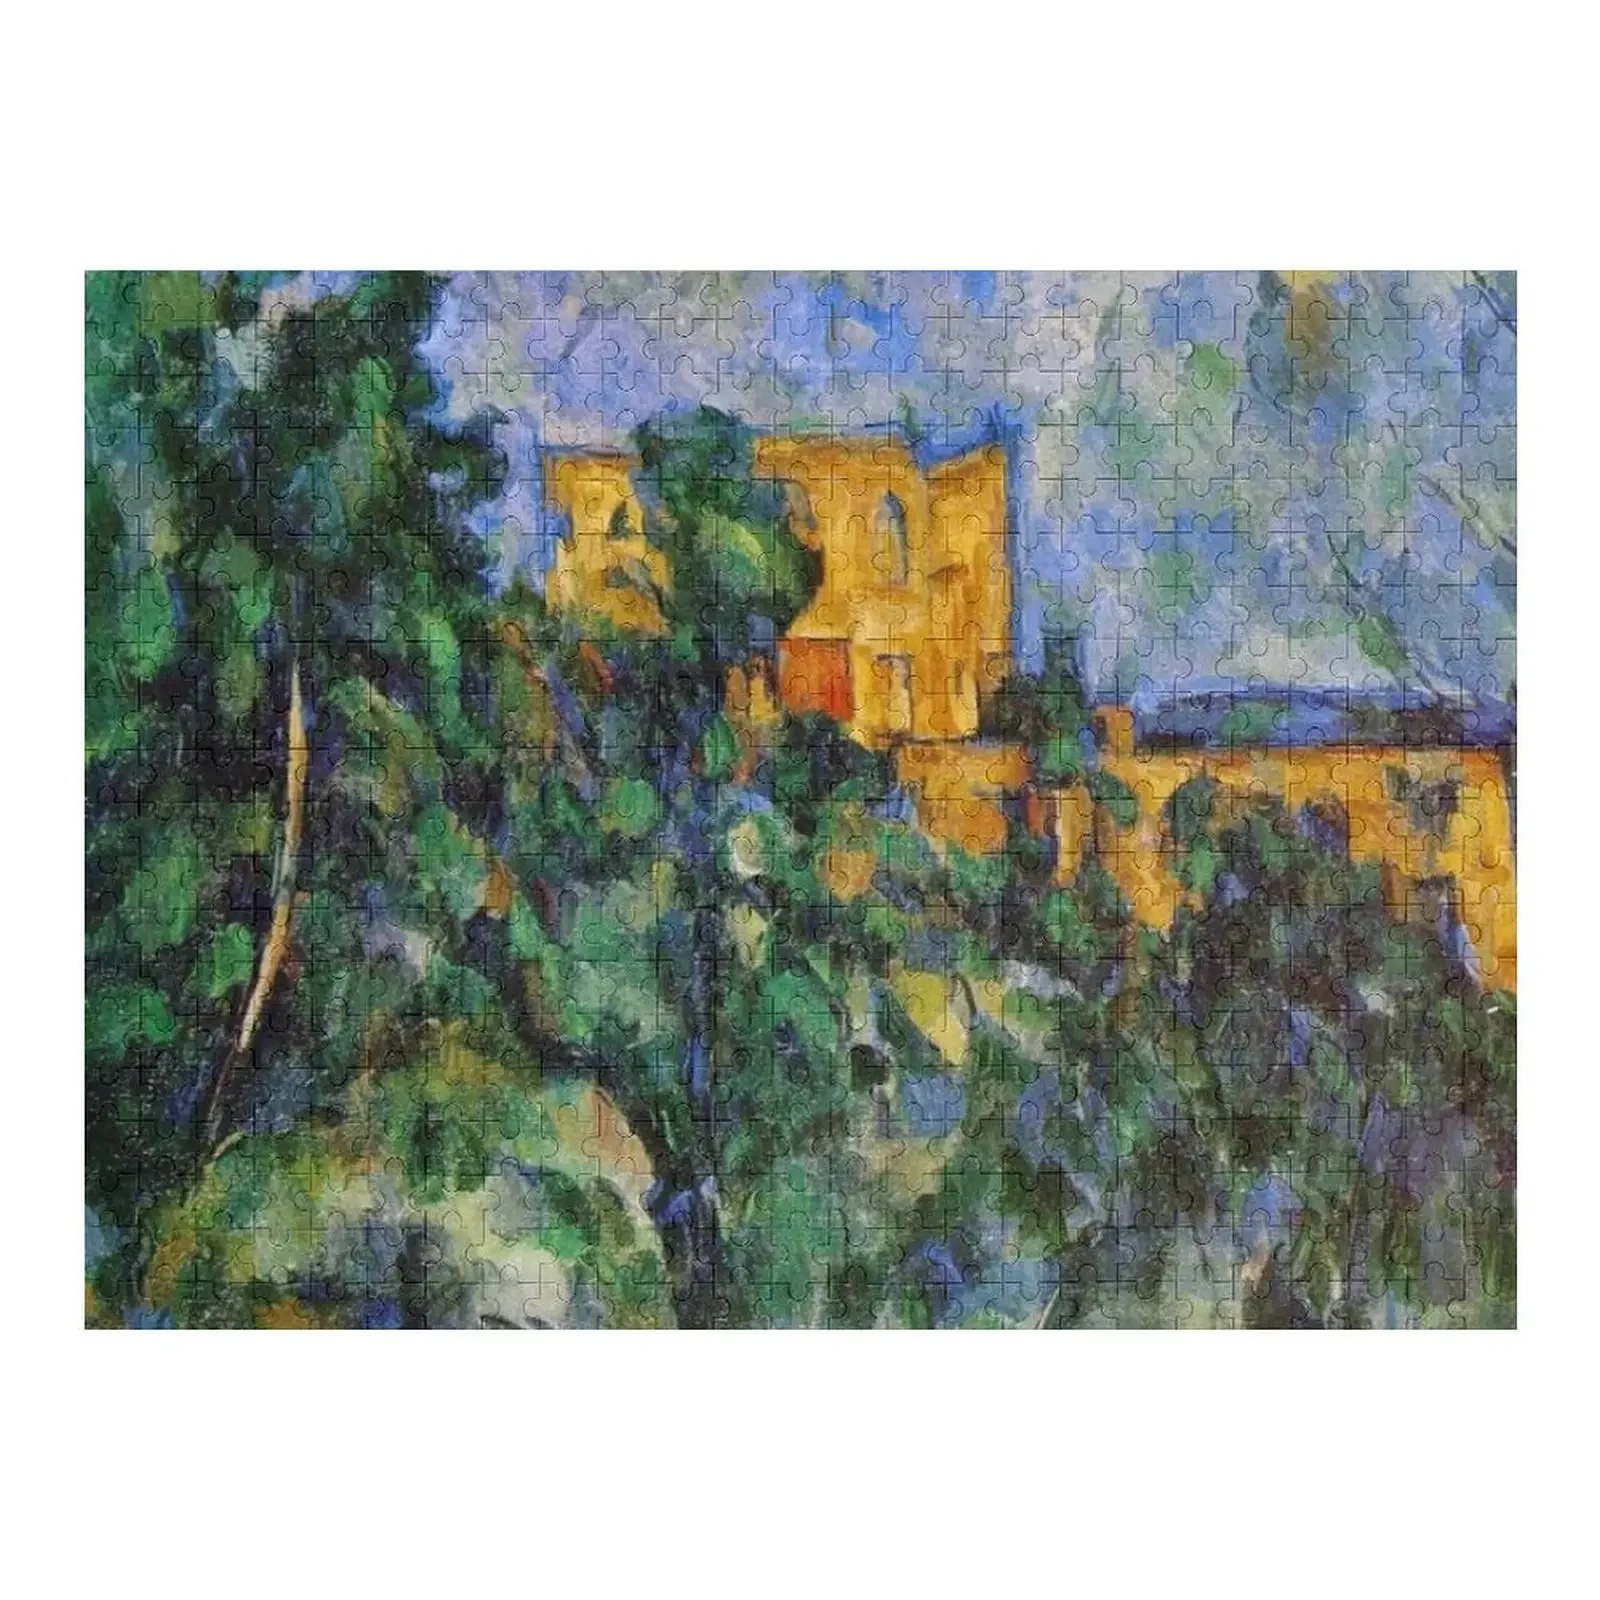 Chateau noir paul cezanne artwork drawing Jigsaw Puzzle Personalized Toy Wood Adults With Personalized Photo Wooden Name Puzzle paul klee 1939